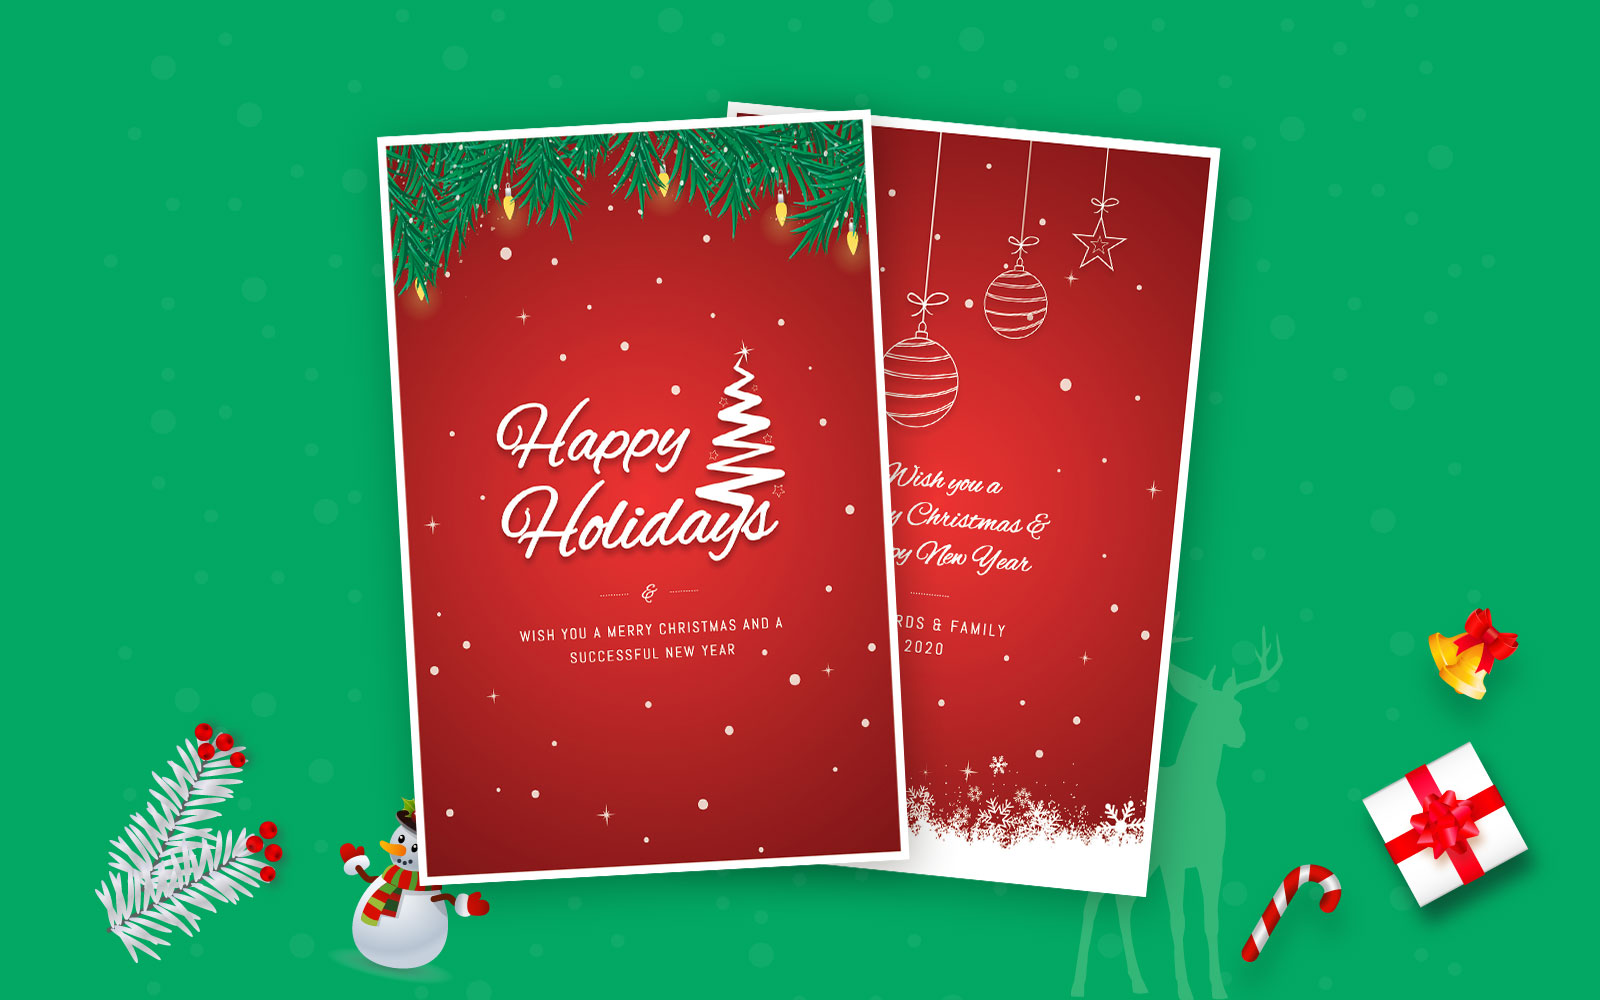 Happy Holidays Greeting Card - Corporate Identity Template